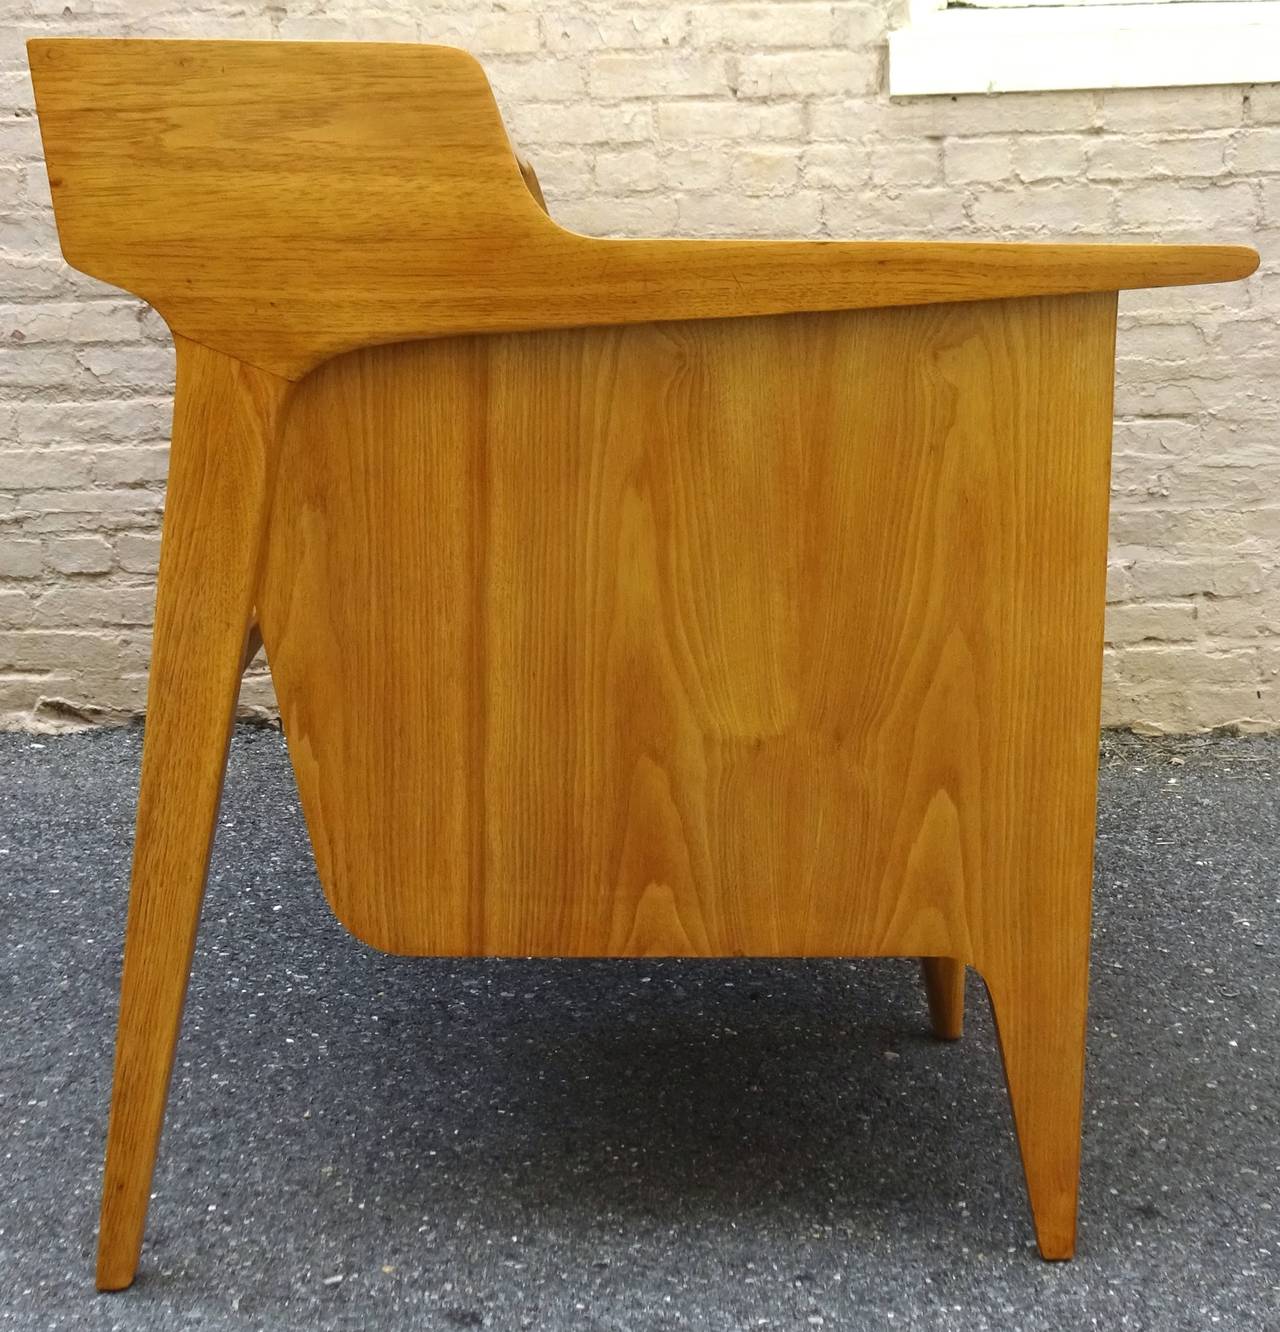 Mid-20th Century Sculptural 1950s American Modernist Bleached Walnut Desk For Sale